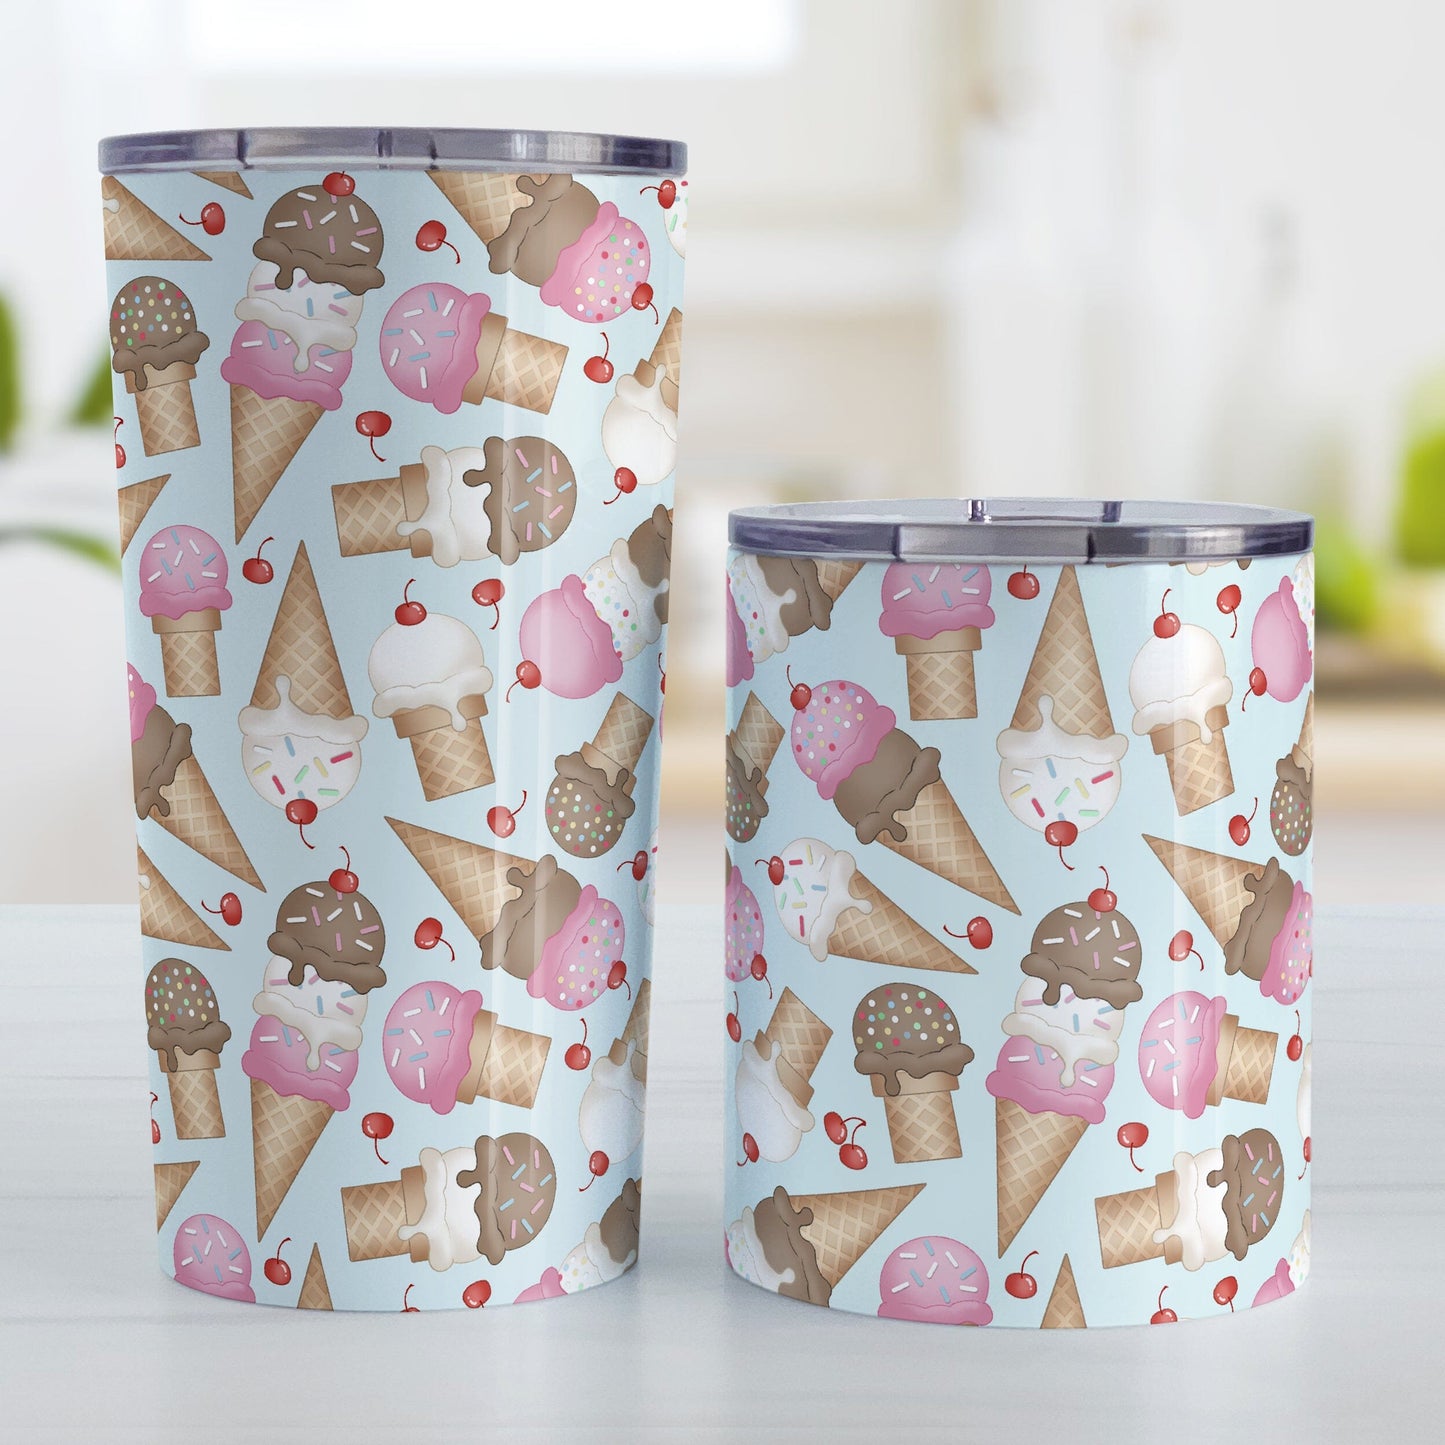 Ice Cream Cones Pattern Tumbler Cup (20oz or 10oz) at Amy's Coffee Mugs. Stainless steel tumbler cups printed with a design of hand-drawn ice cream cones with chocolate, strawberry, and vanilla scoops, with sprinkles and cherries, over a pale blue color, in a pattern that wraps around the cups. Photo shows both size cups on a table next to each other.